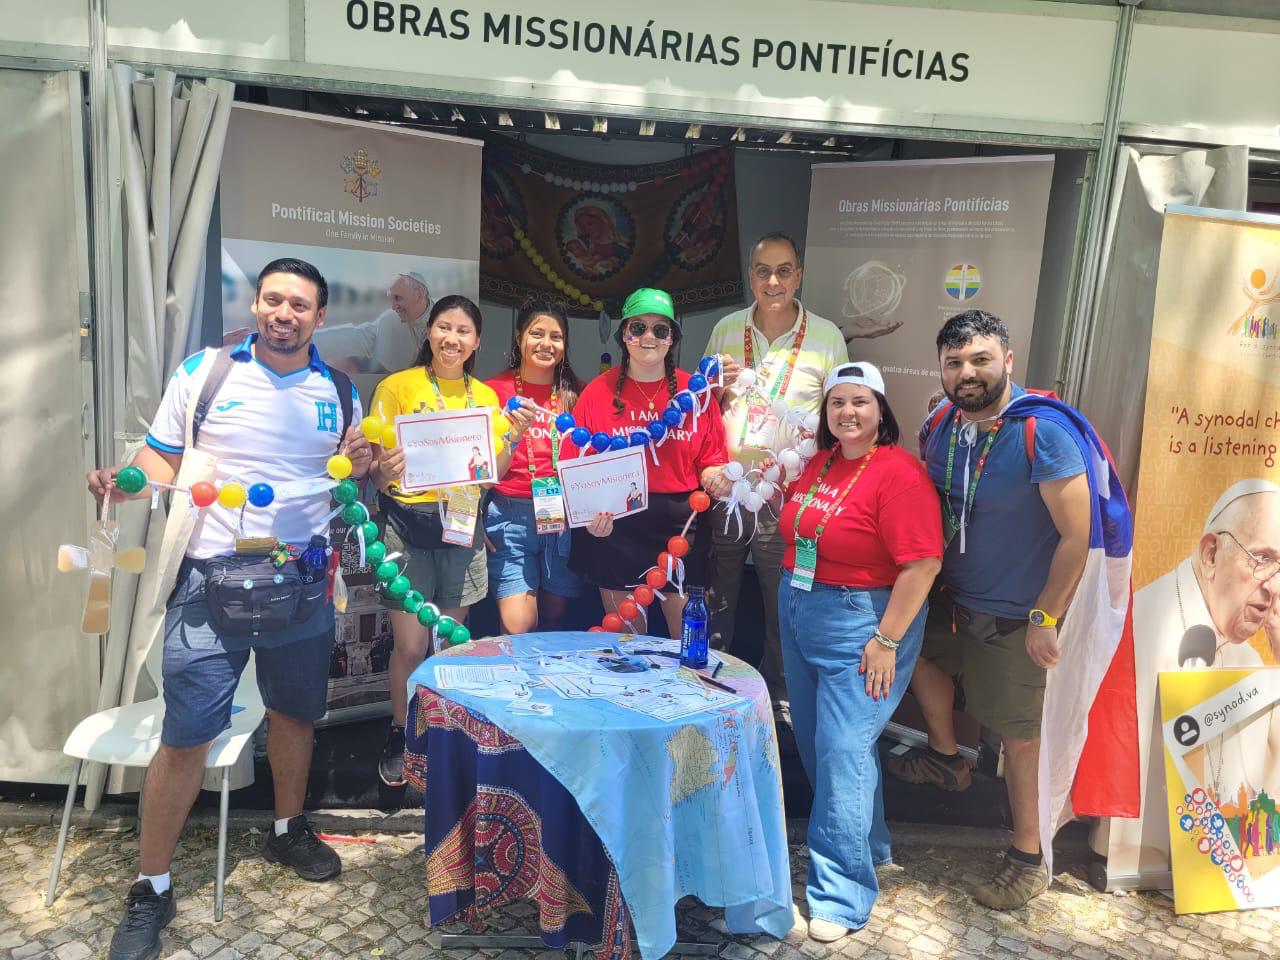 The Pontifical Mission Societies at the XXXVII World Youth Day